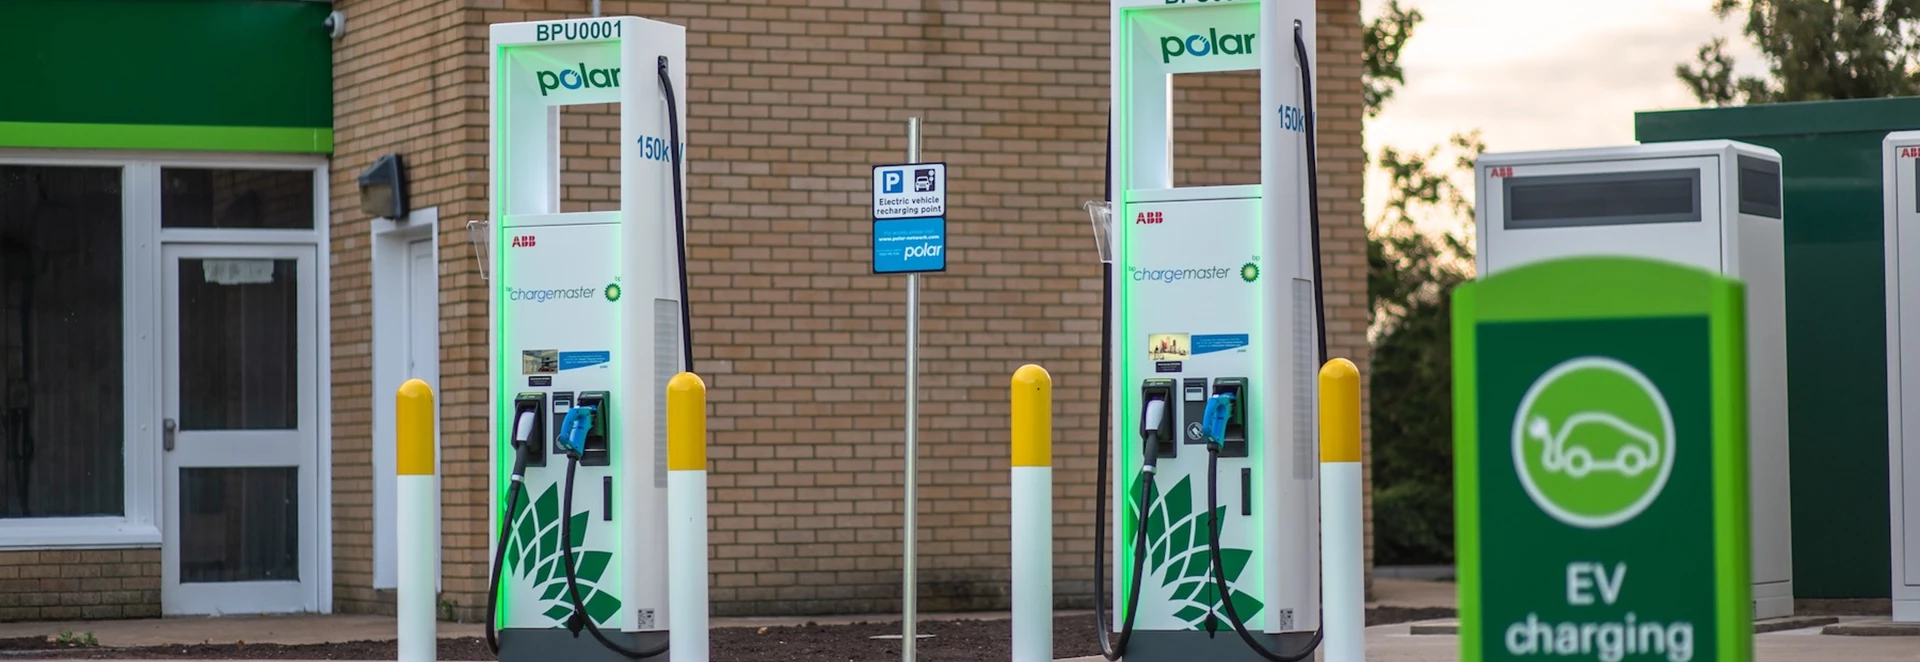 UK’s largest EV charging provider rolls out rapid chargers at BP forecourts